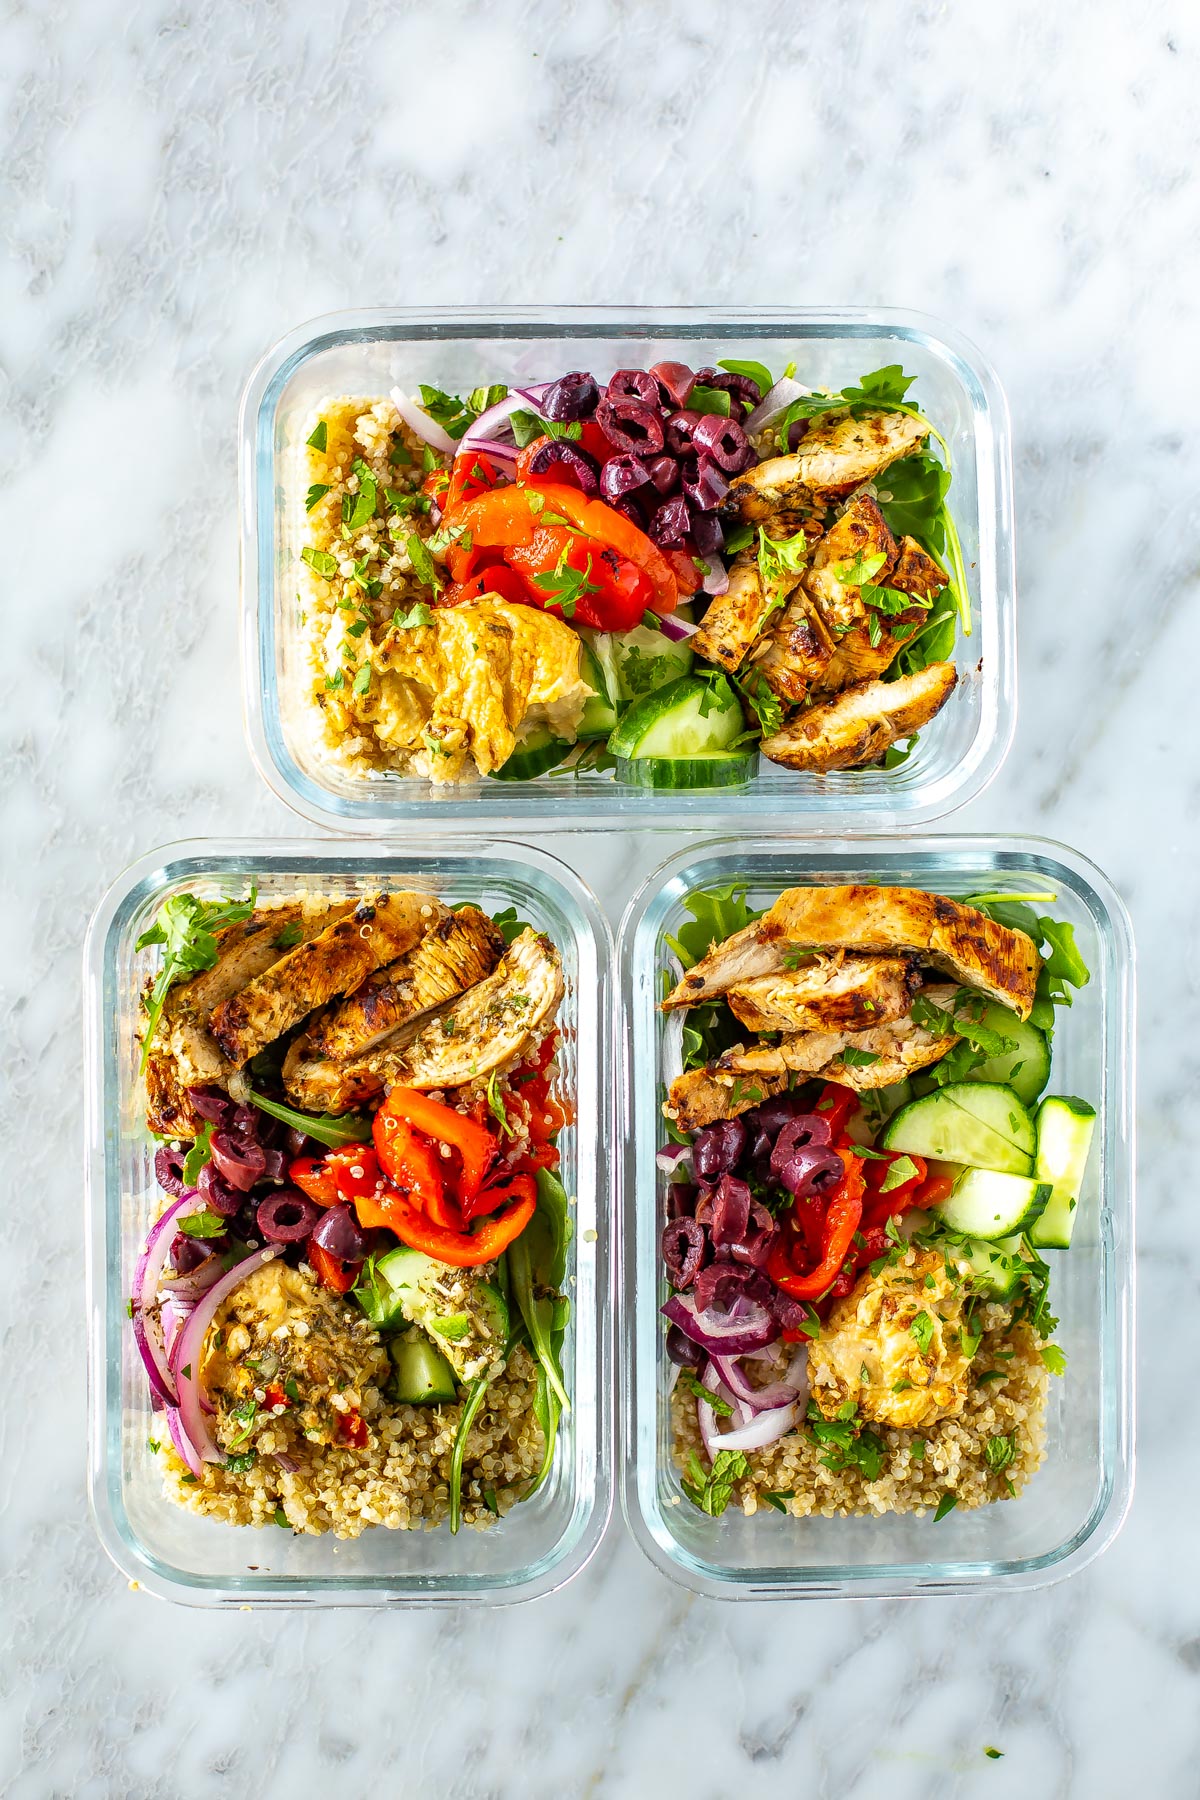 Three Mediterranean bowls stored in glass meal prep containers.